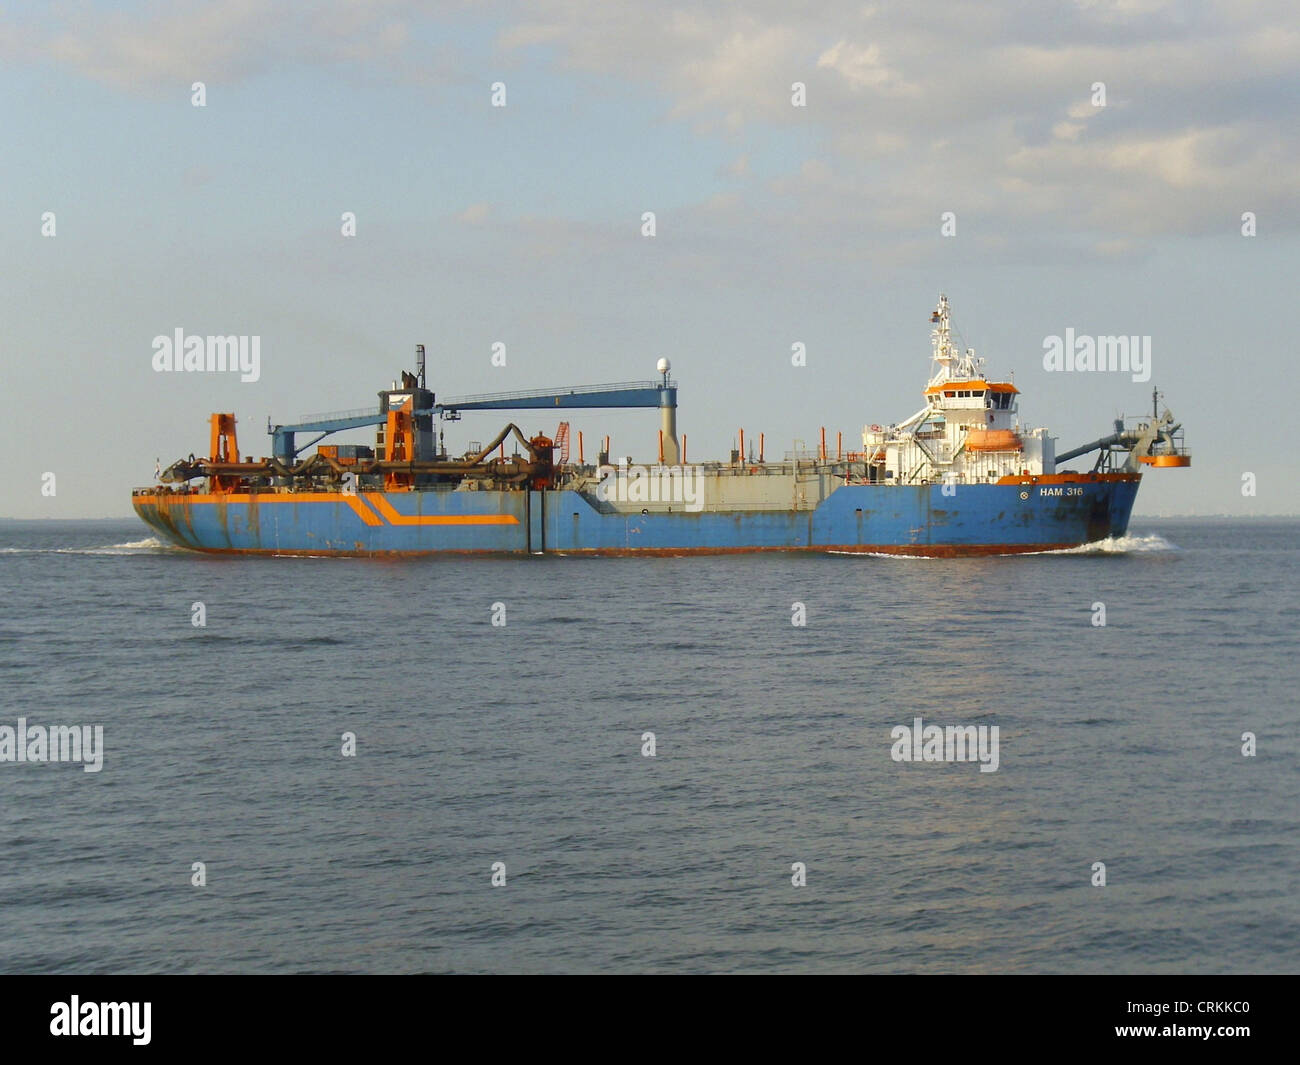 The trailing suction hopper dredger '''HAM 316''' inbound on the river Elbe Stock Photo